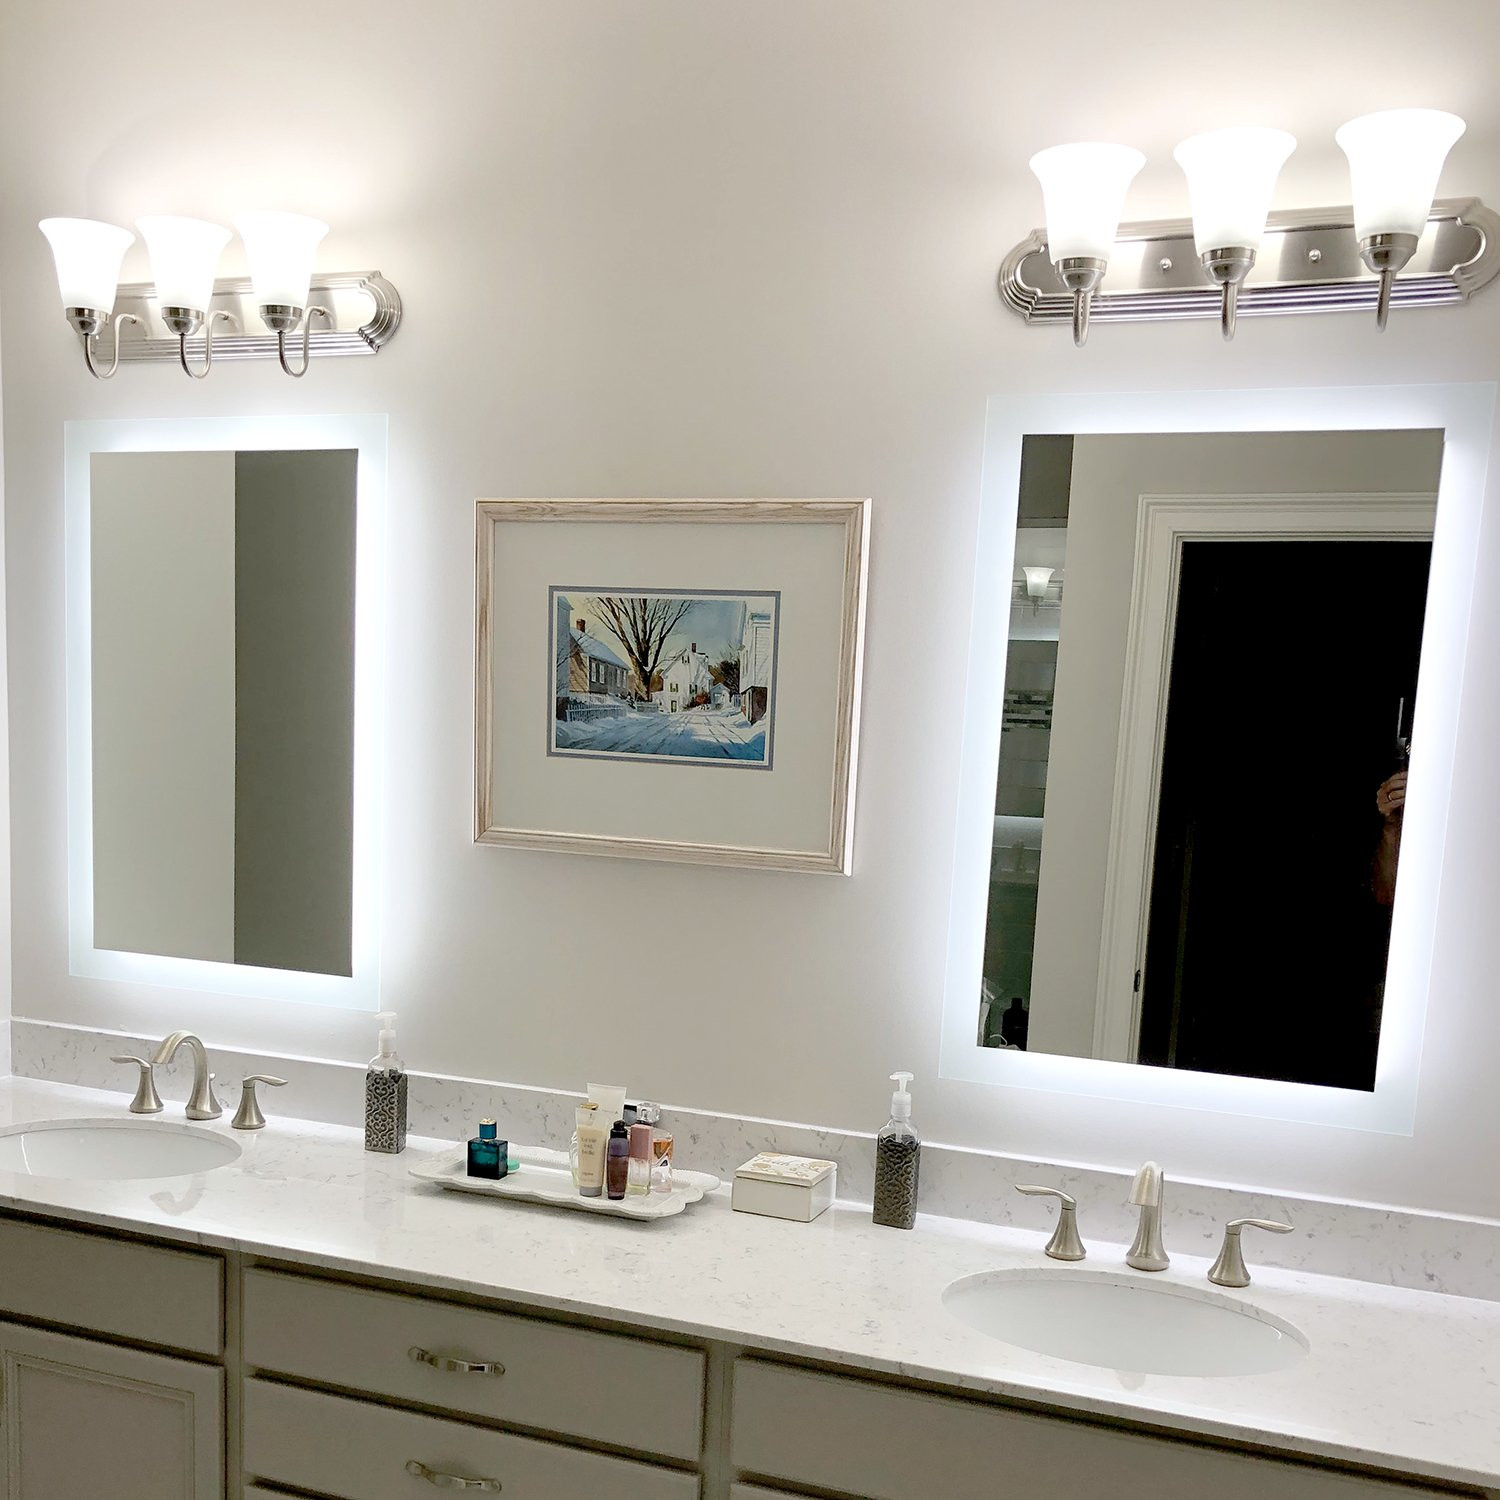 Bathroom Vanity Mirror With Lights Lovely Side Lighted Led Bathroom Vanity Mirror 40quot X 48 Of Bathroom Vanity Mirror With Lights 